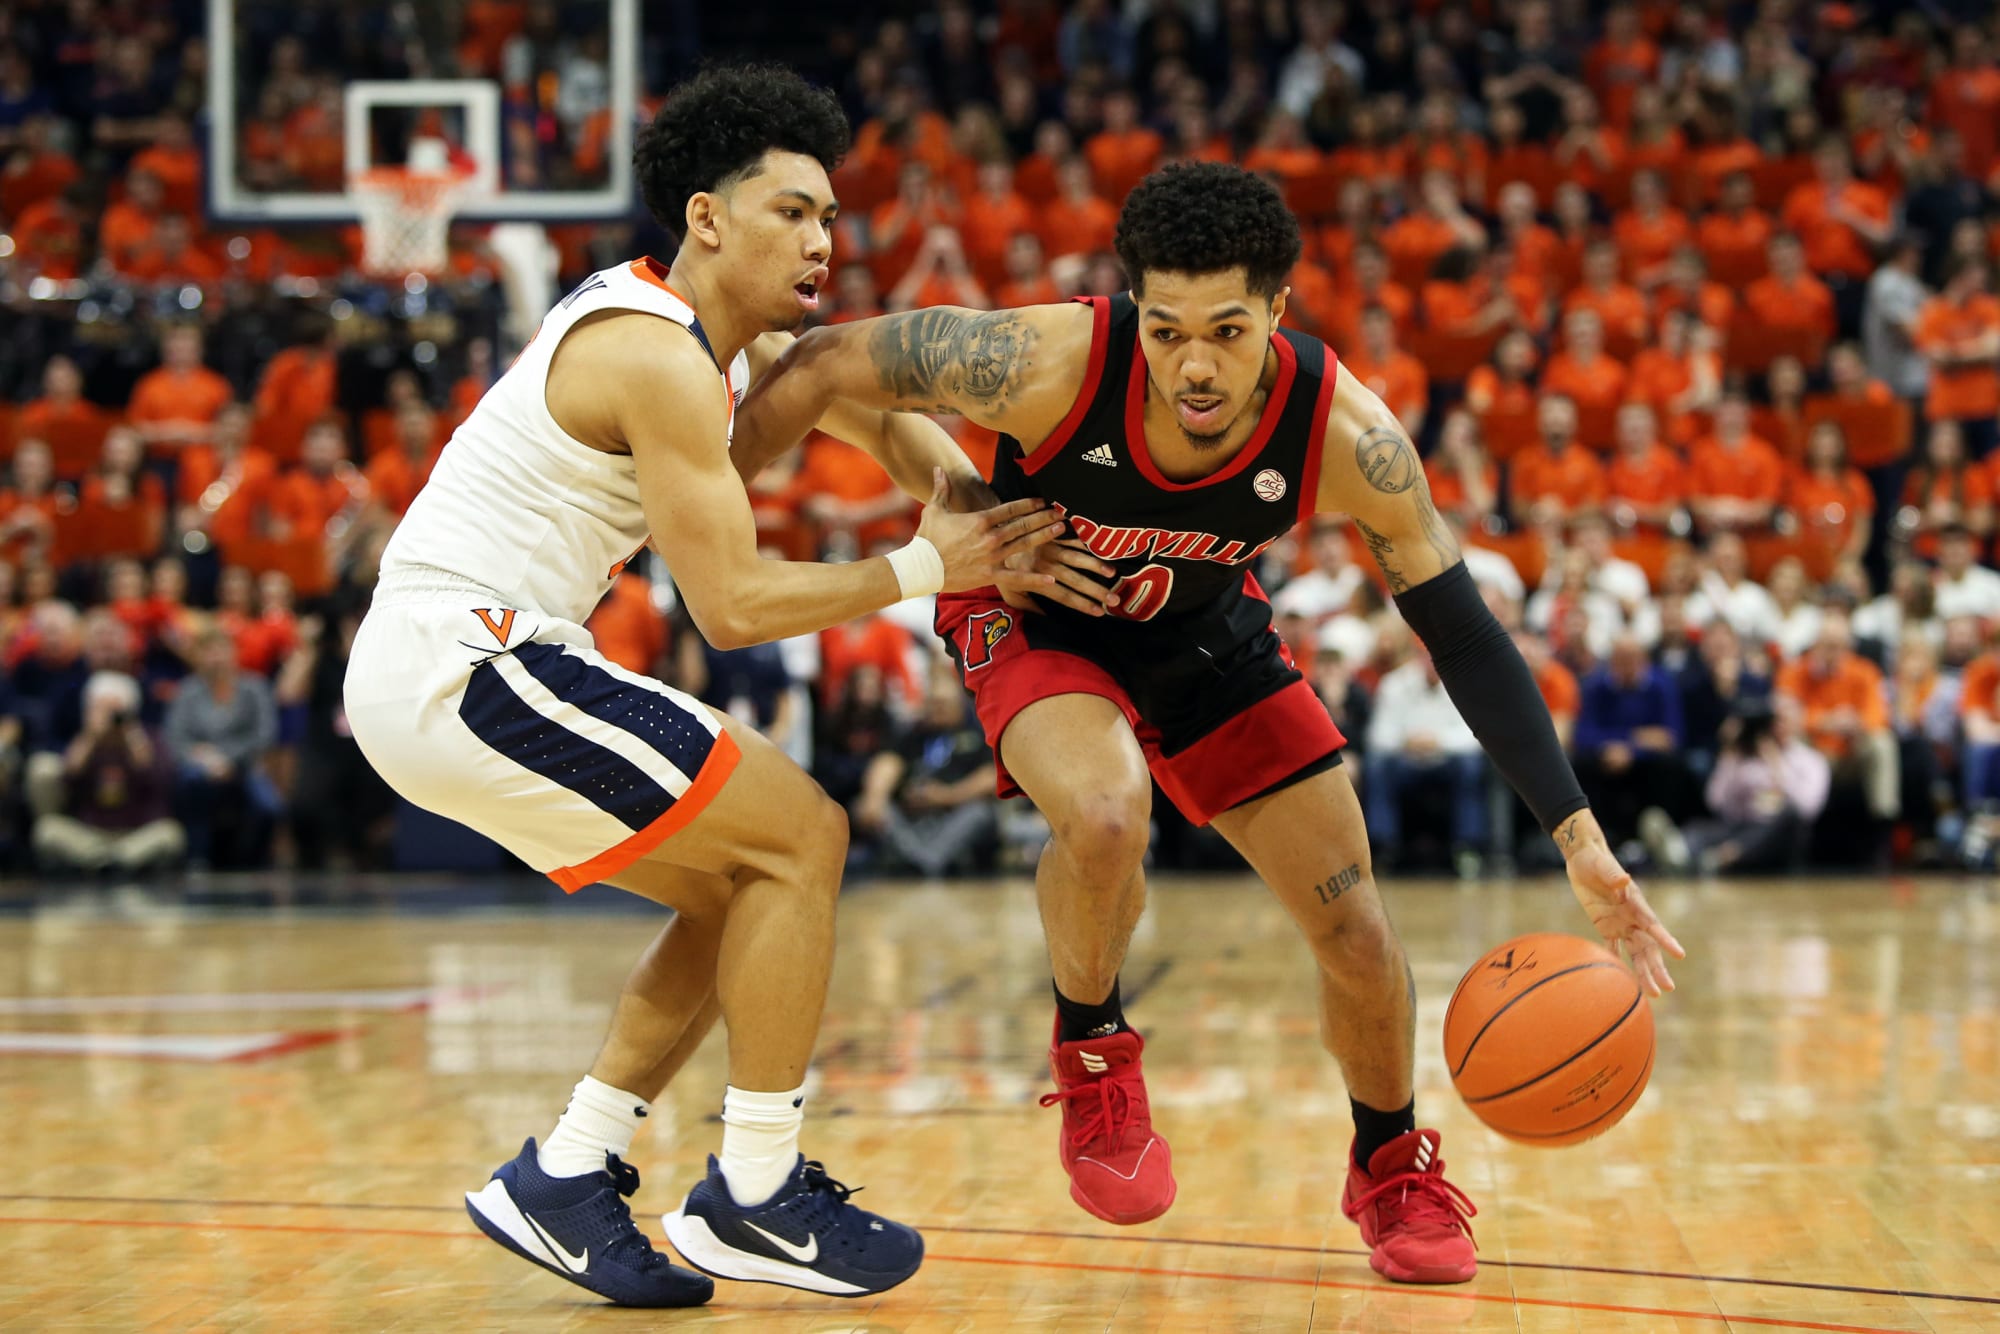 Louisville basketball: Three potential transfer targets for Cards